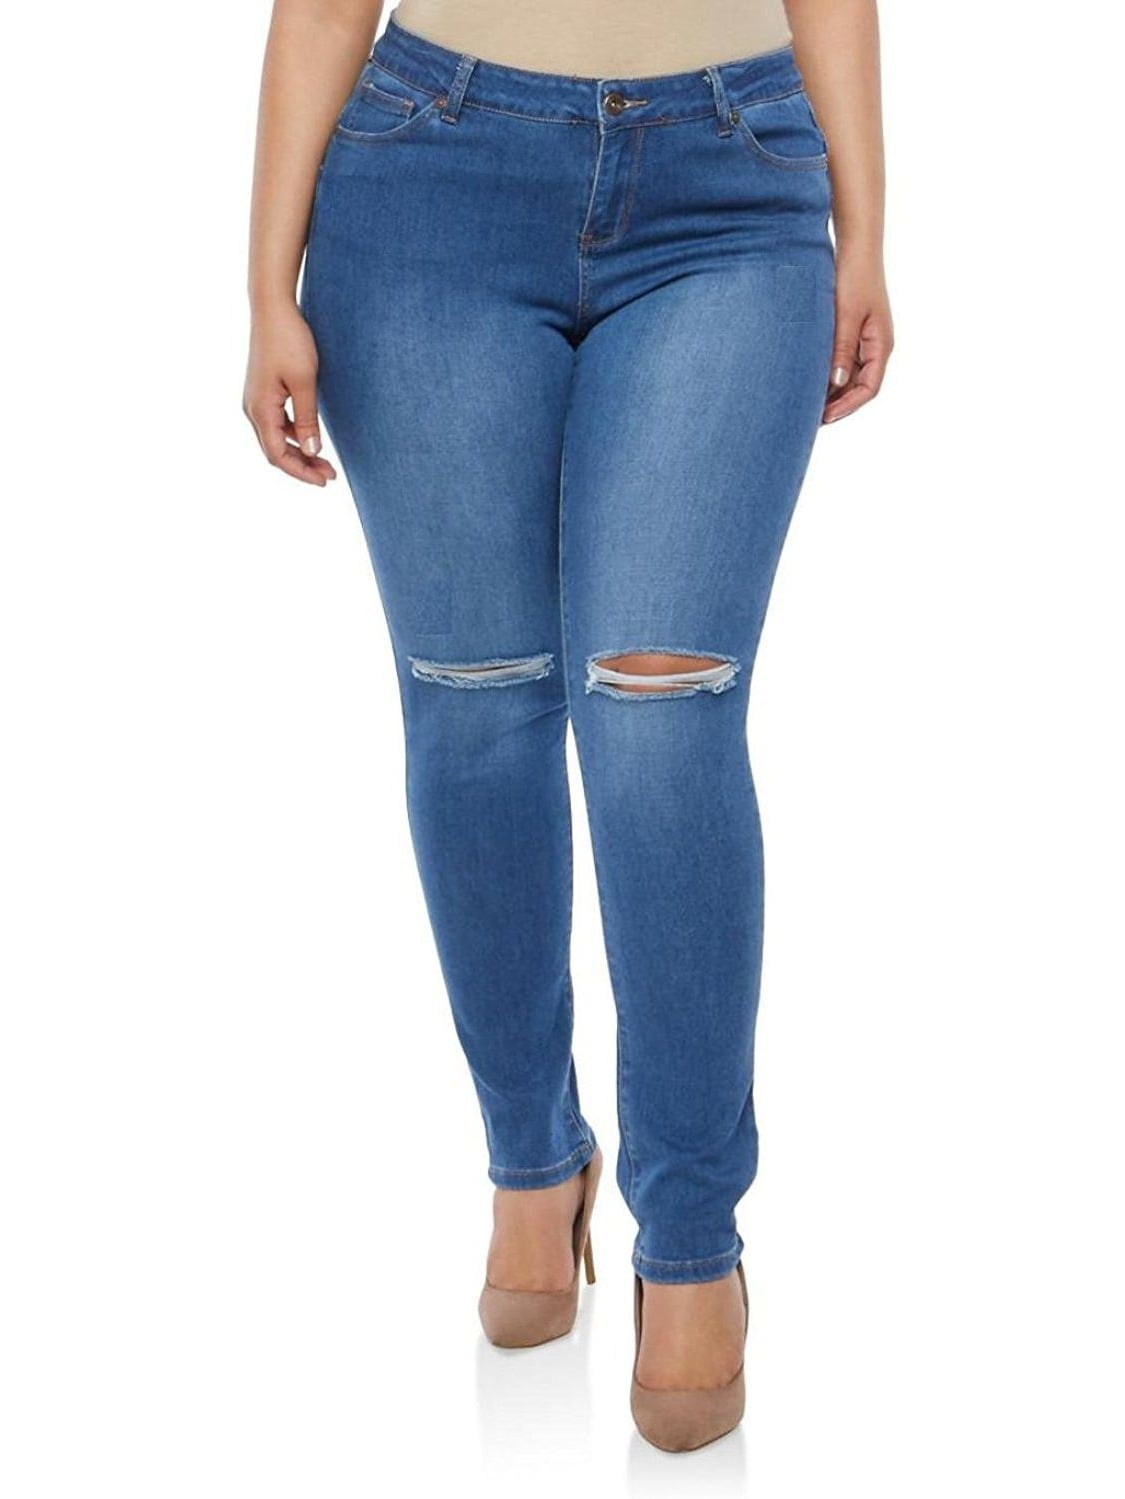 Jeans Womens Plus Size Distressed Knee Hole Ripped Stretch Jeans Skinny ...